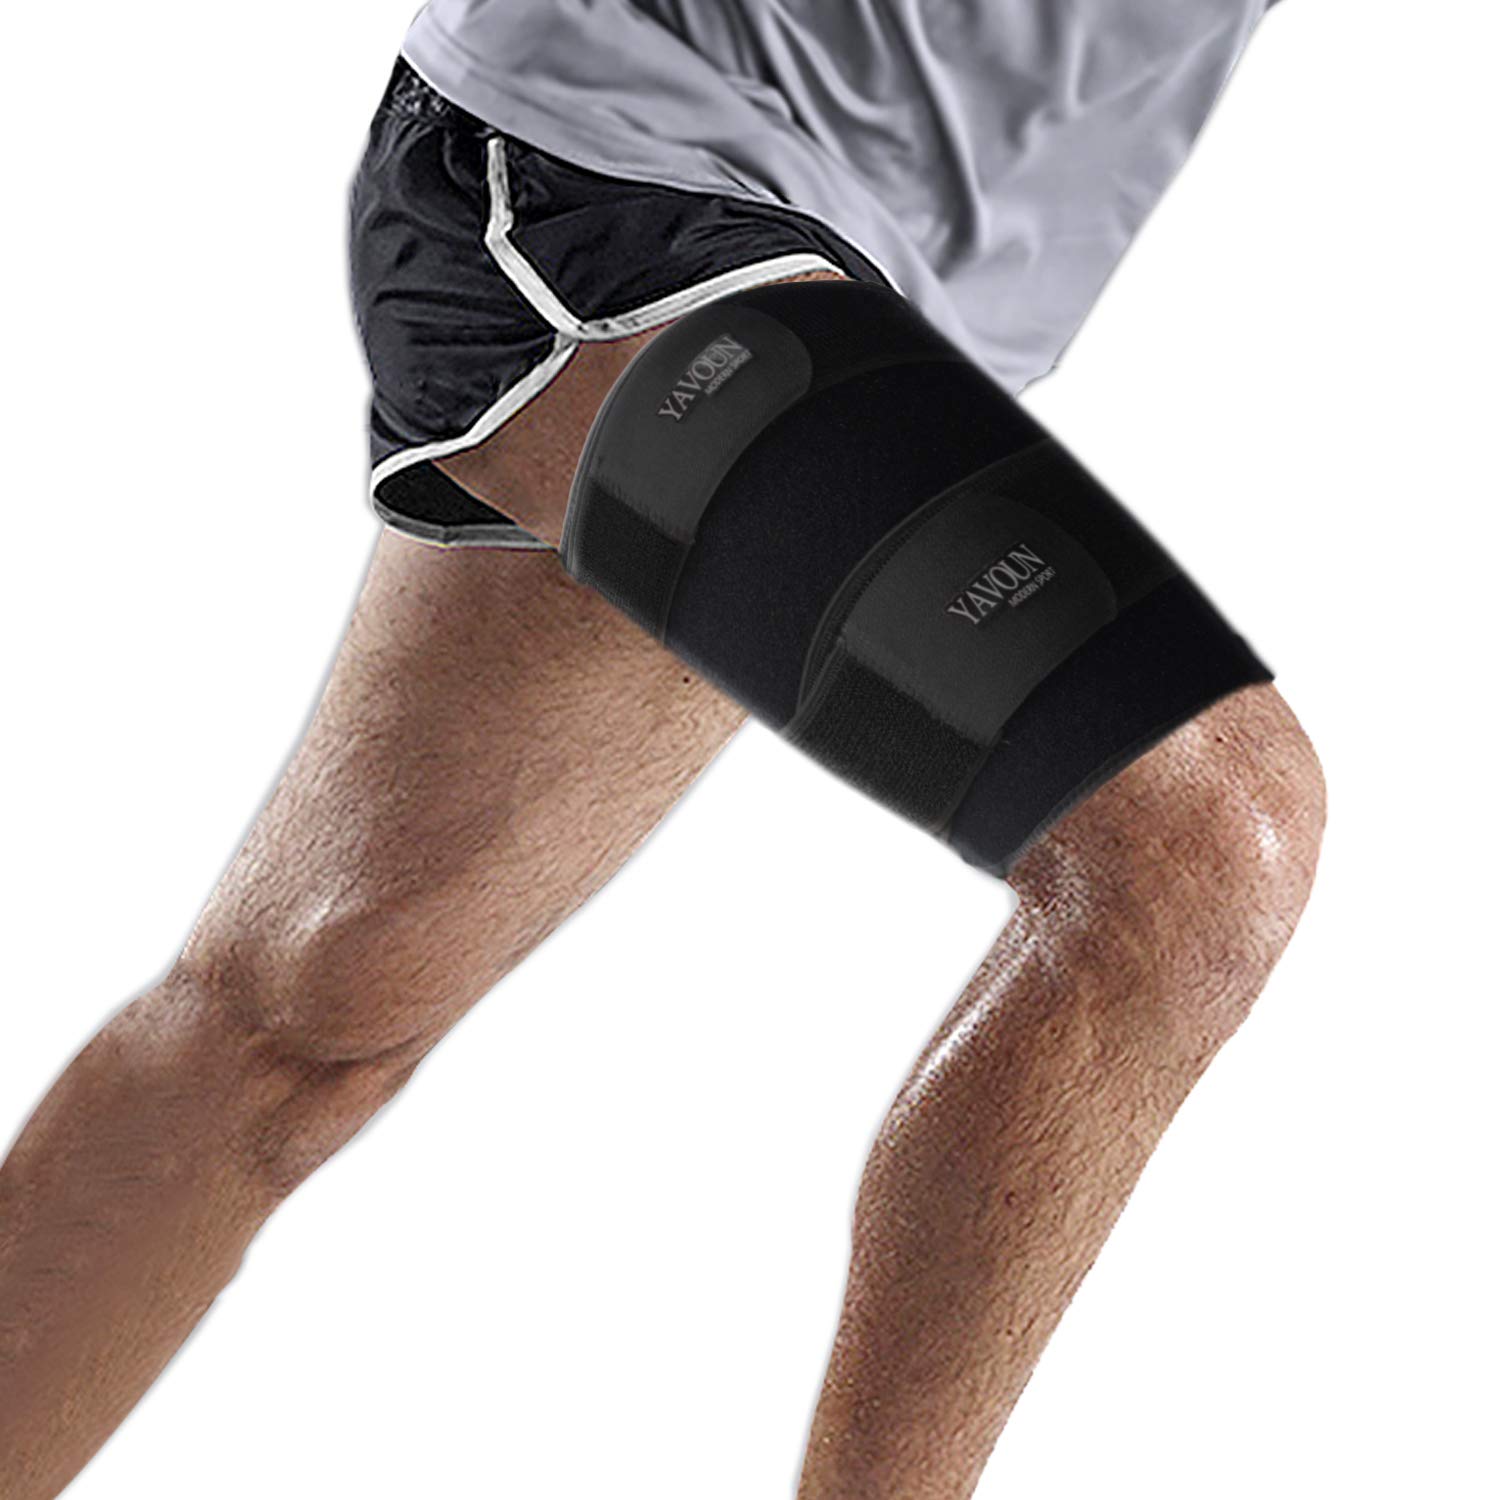 Thigh Compression Sleeve - Hamstring Wrap Thigh Brace for Pulled